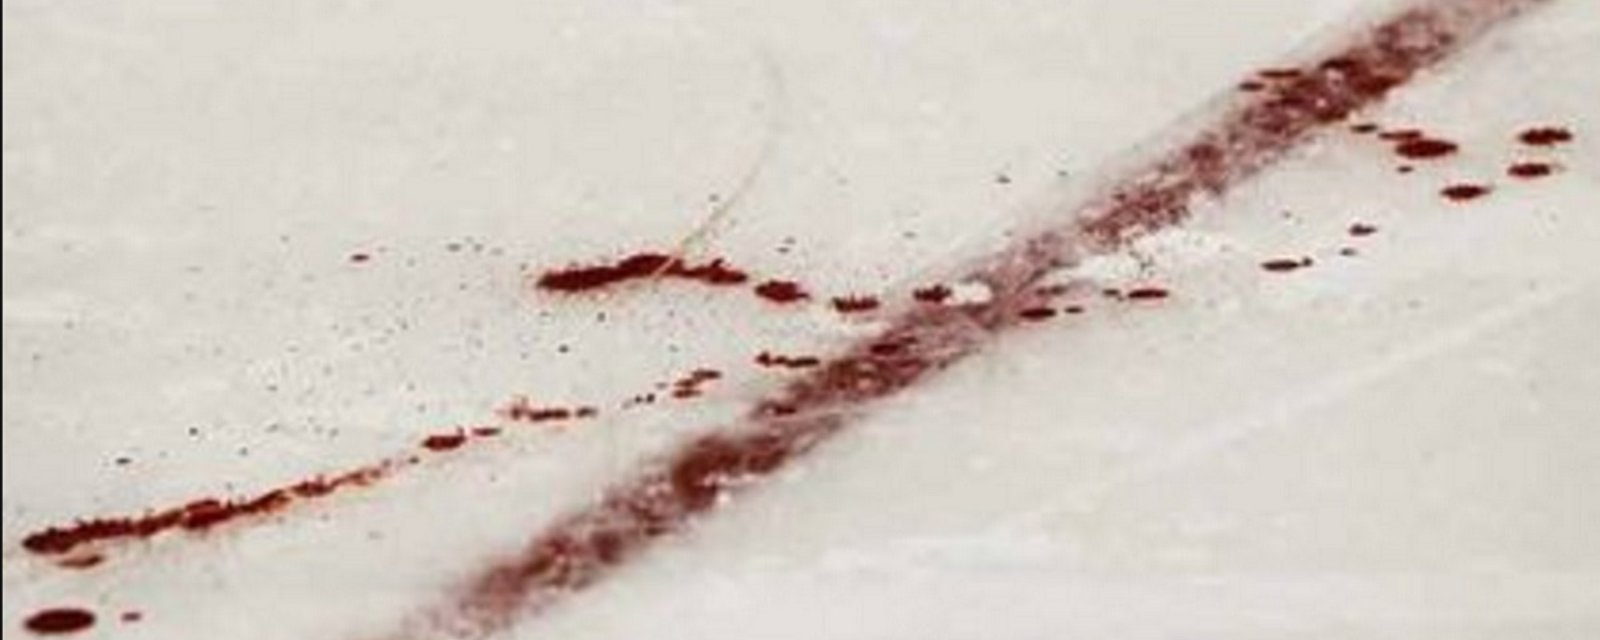 Man shot in the head after argument during children's hockey game.